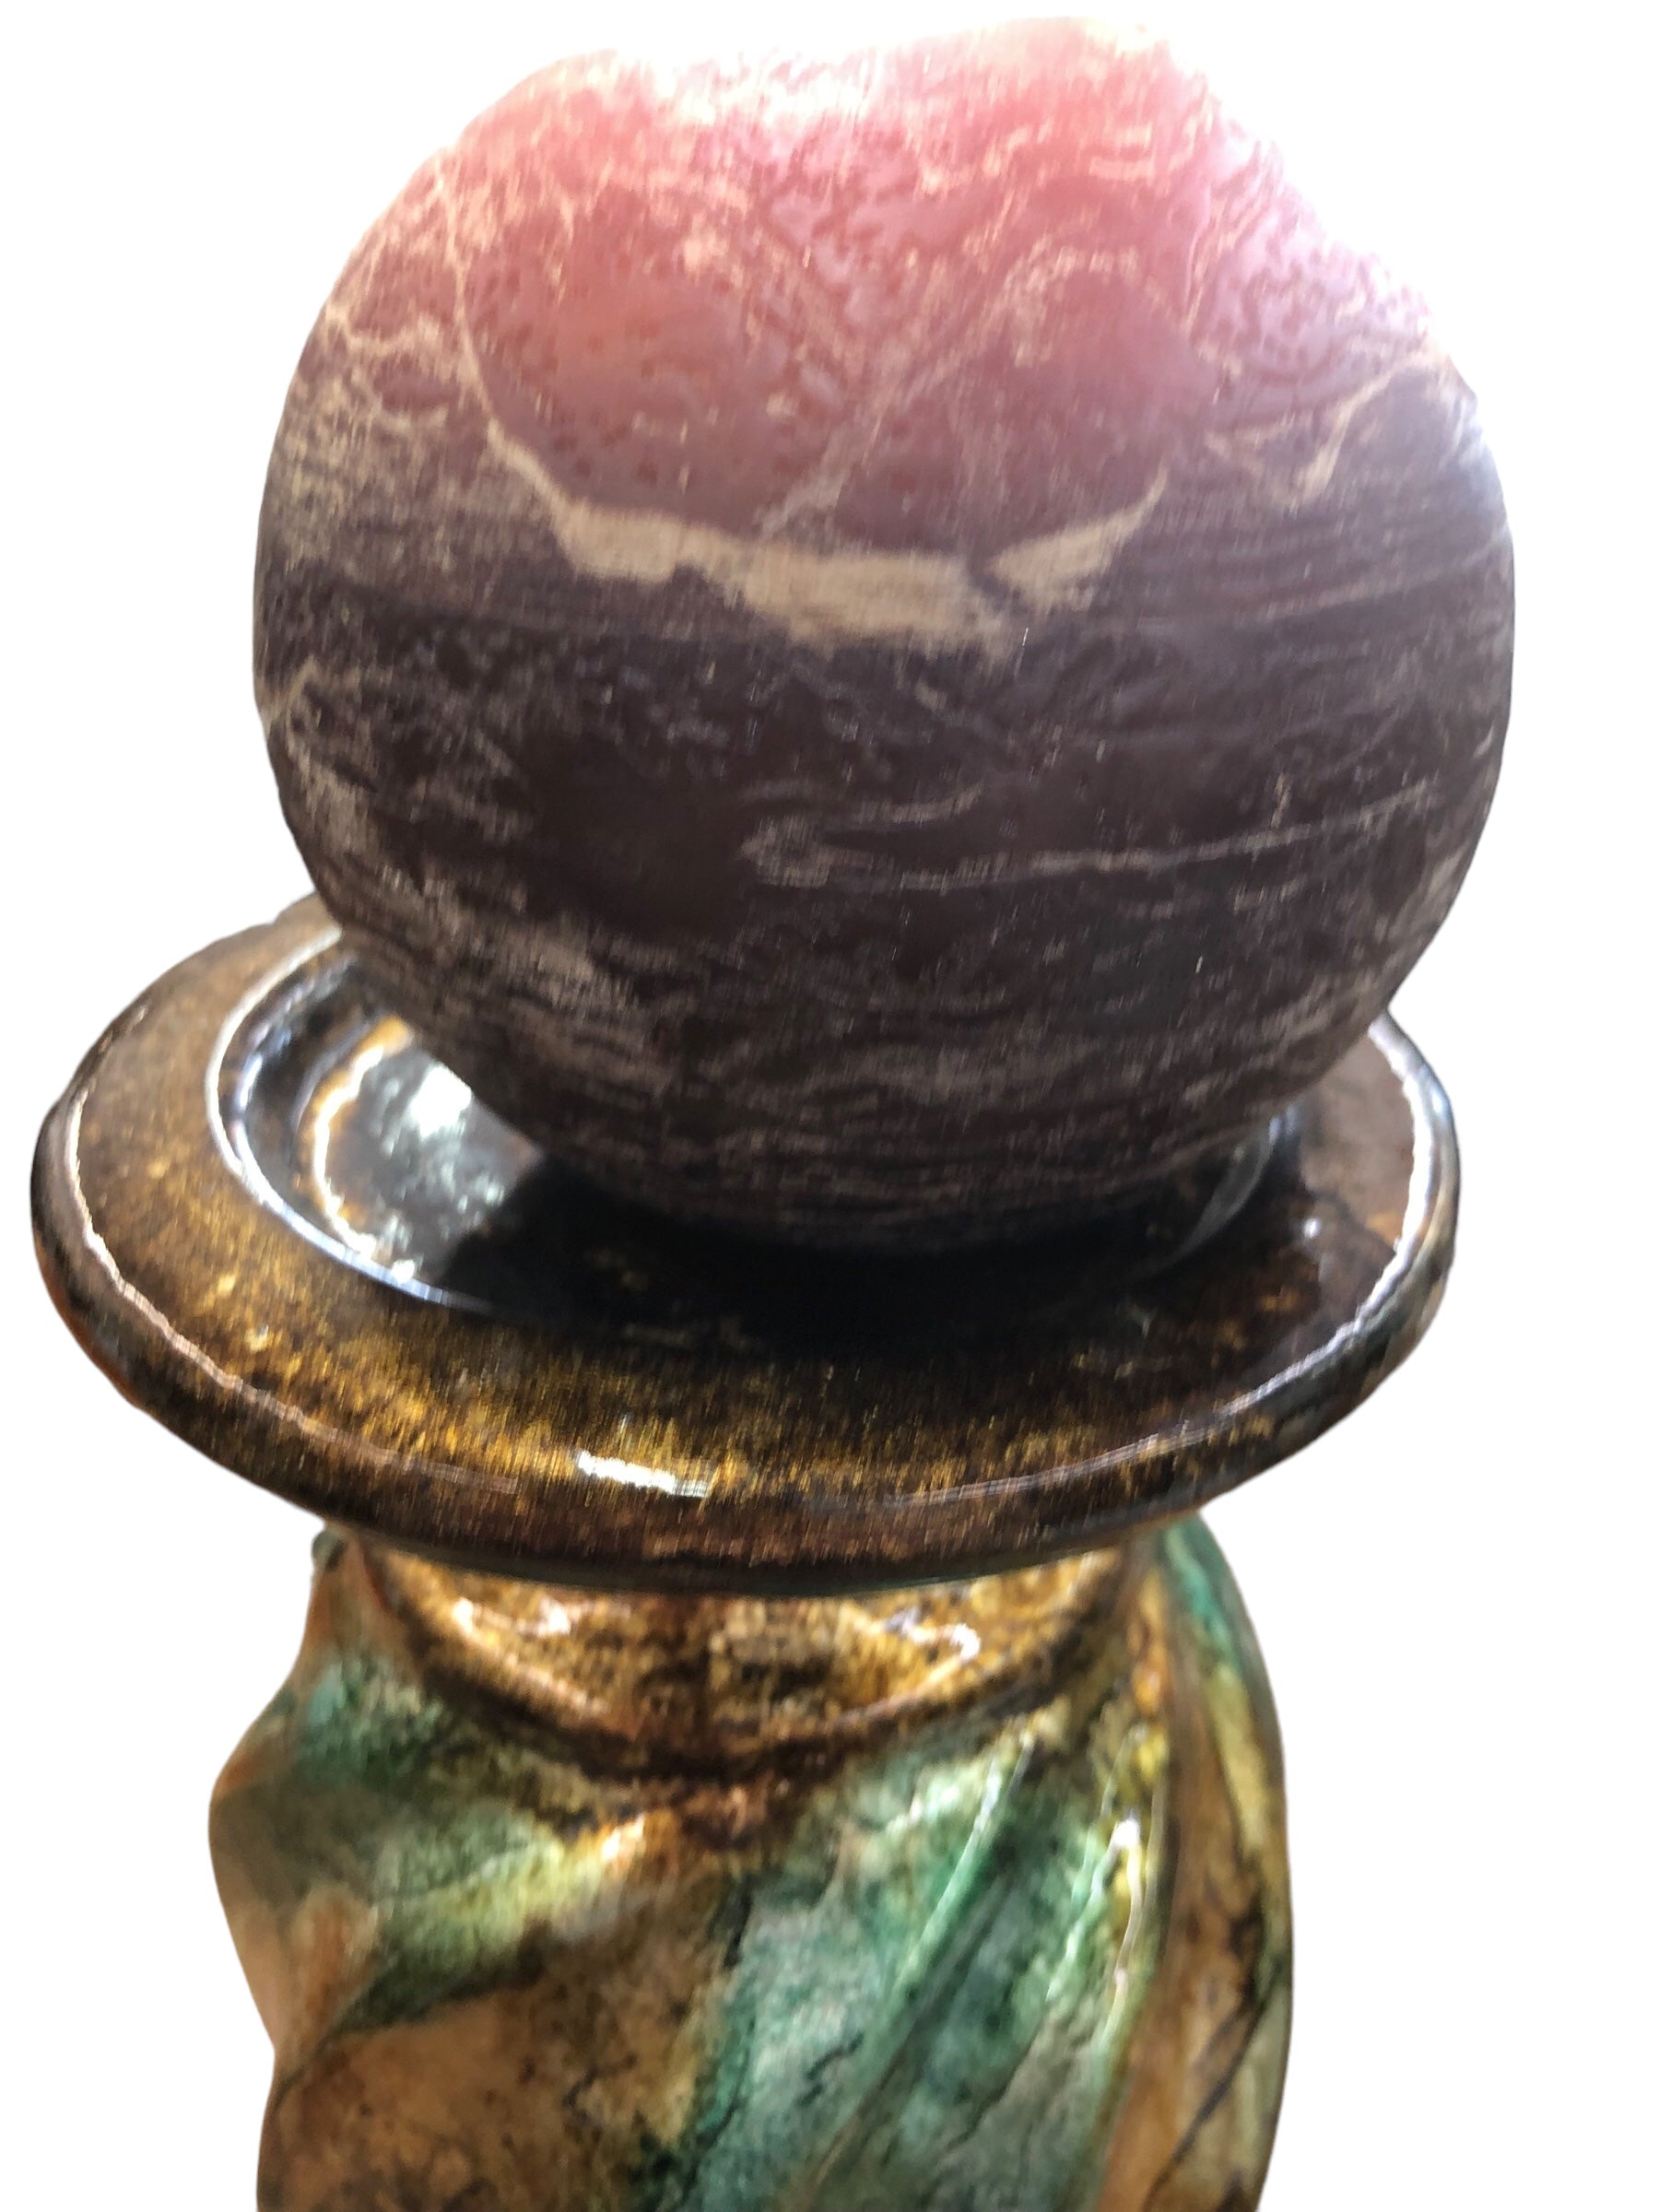 Turquoise/ Brown swirl design candle holder